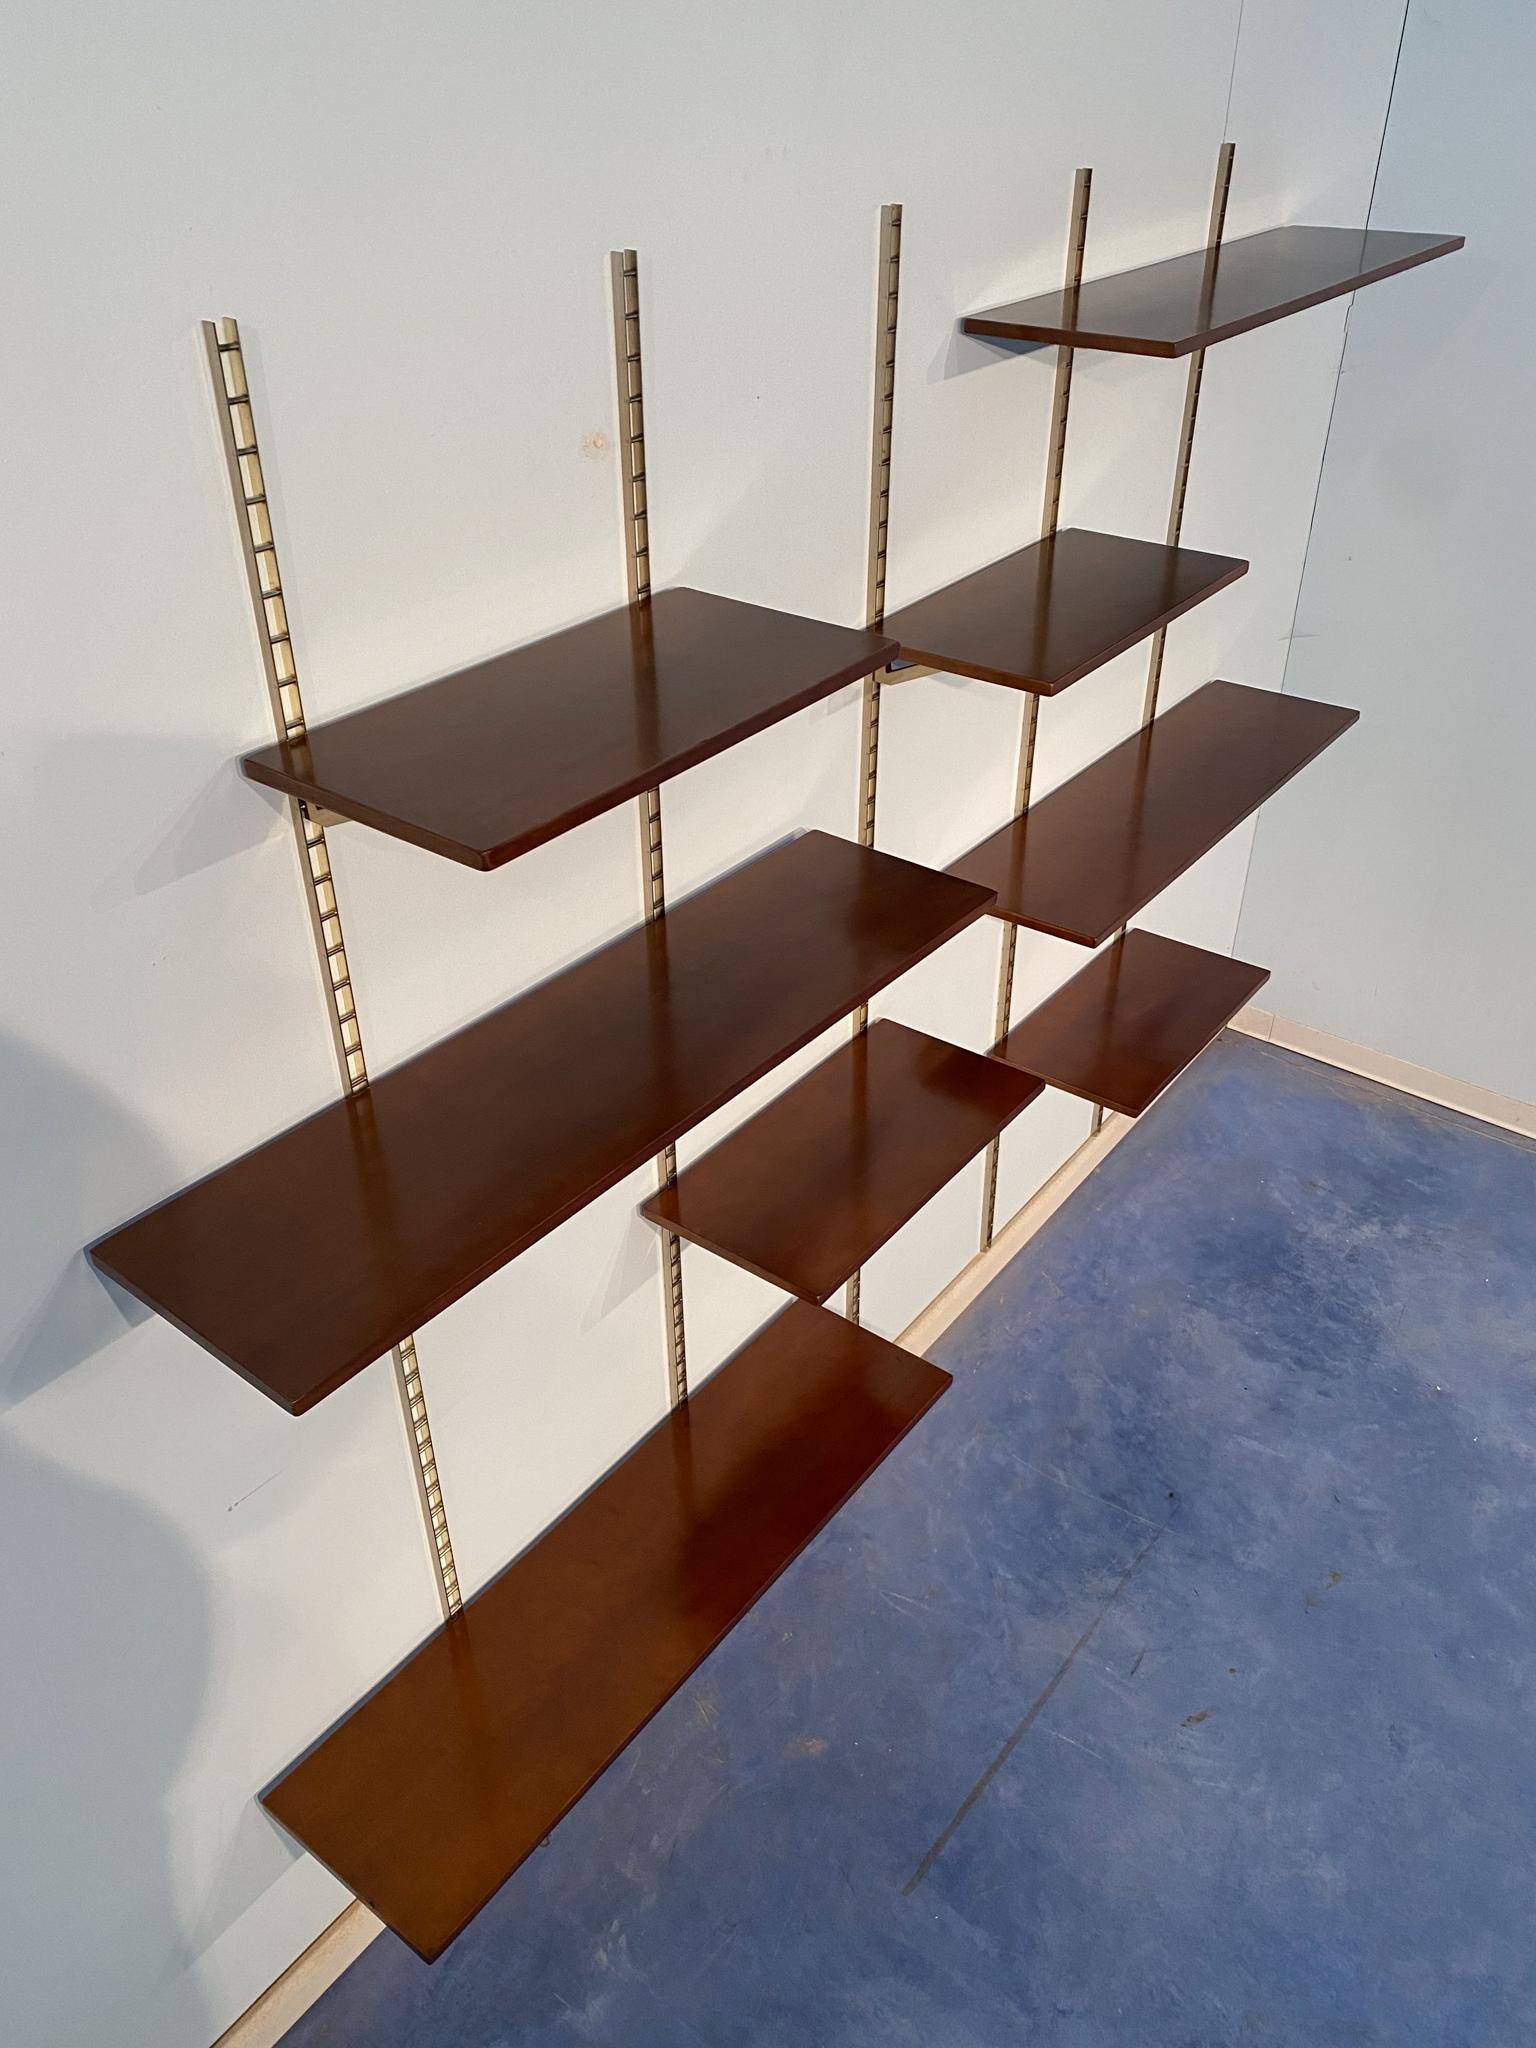 An eye-catching mid-century Italian wall unit or bookcase made from gilded metal and walnut shelves that can be adapted to any setting due to its lightness and refinement. The bookcase is composed of N.5 track supports, N.16 shelves brackets, N.4